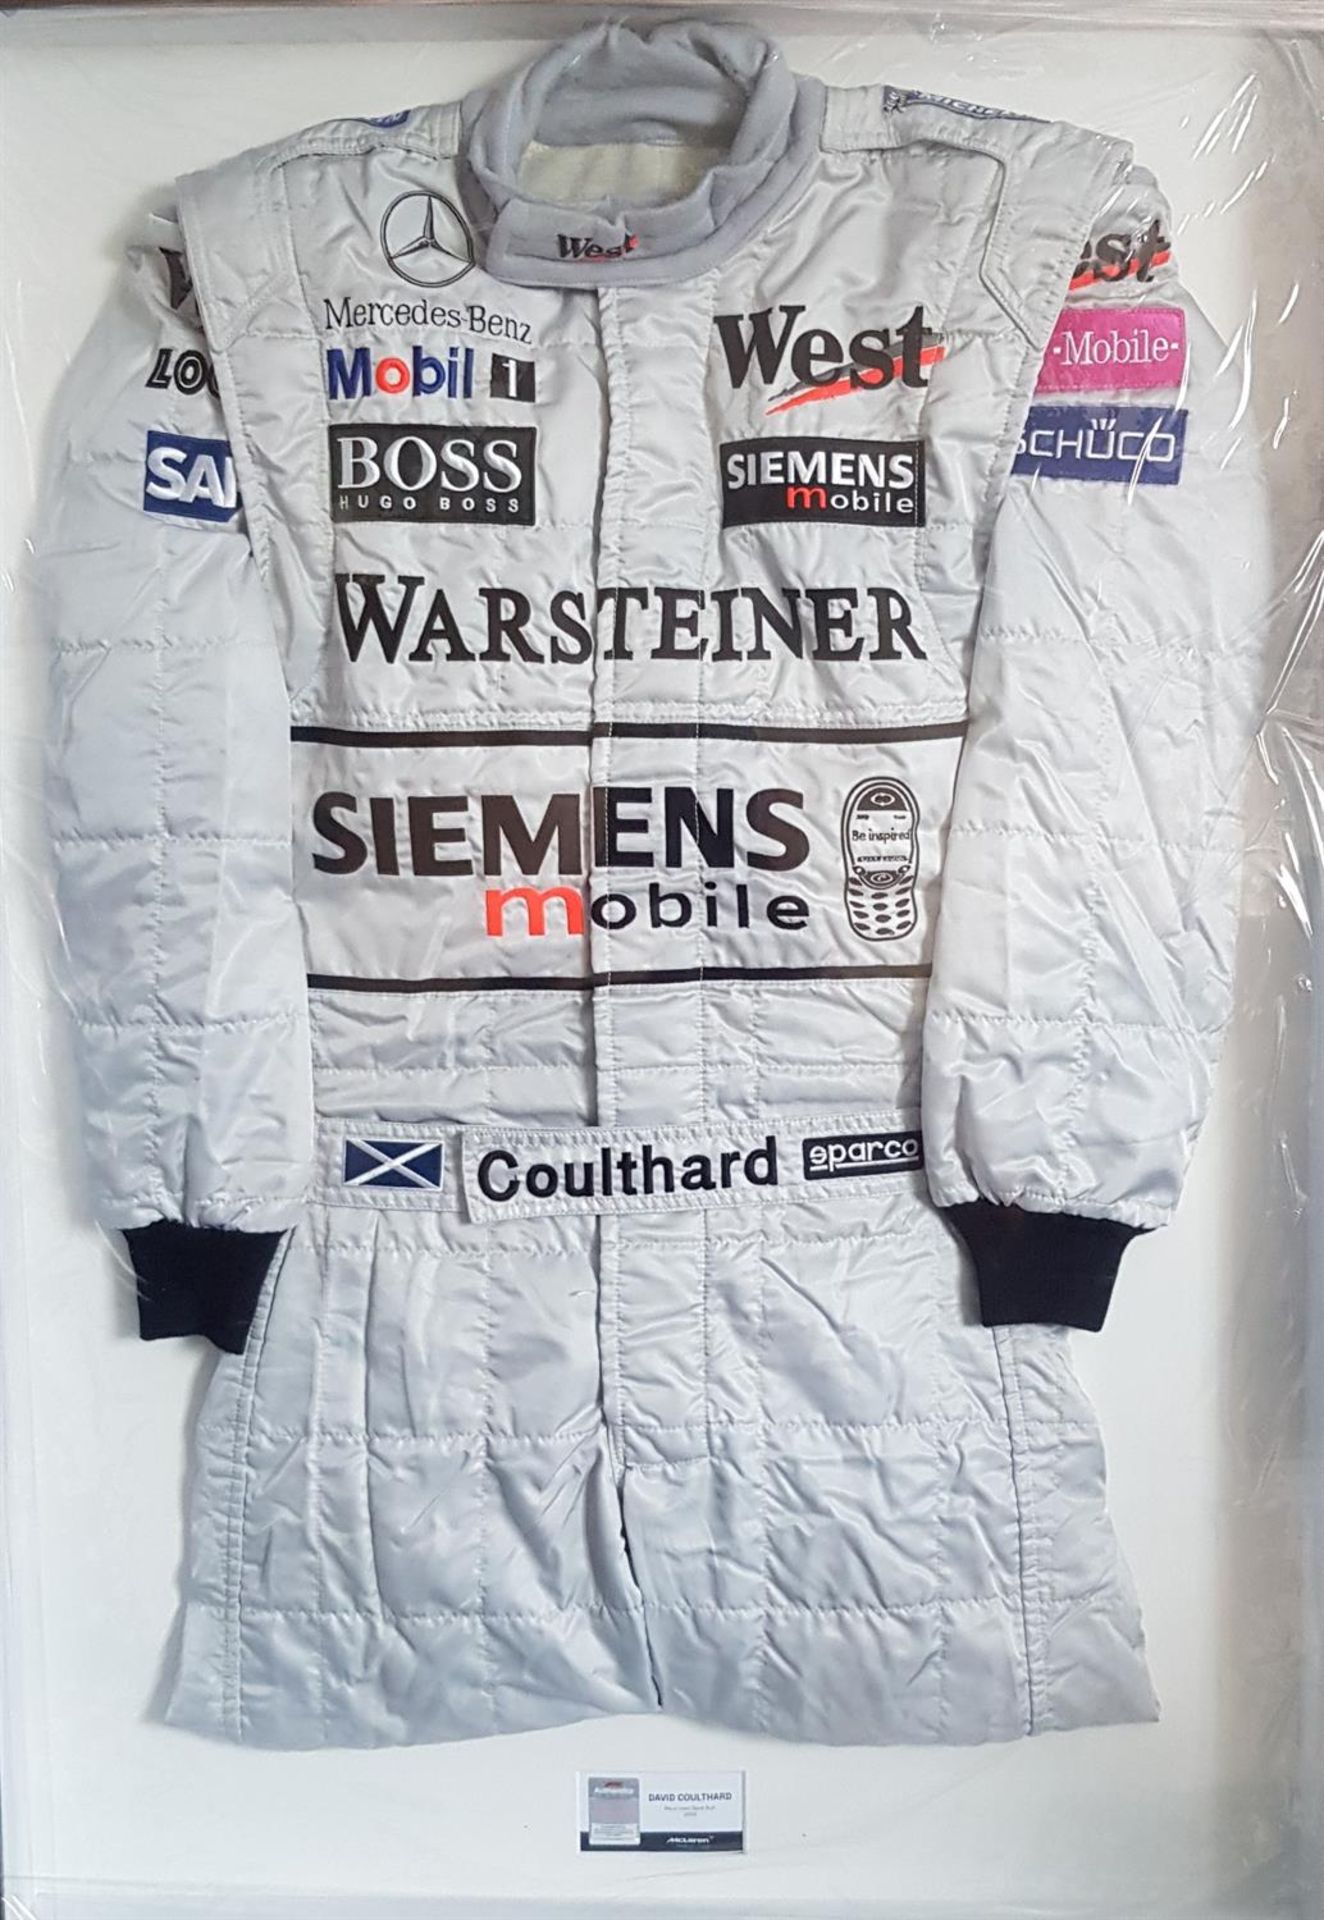 2003 David Coulthard Race Suit - Image 4 of 6